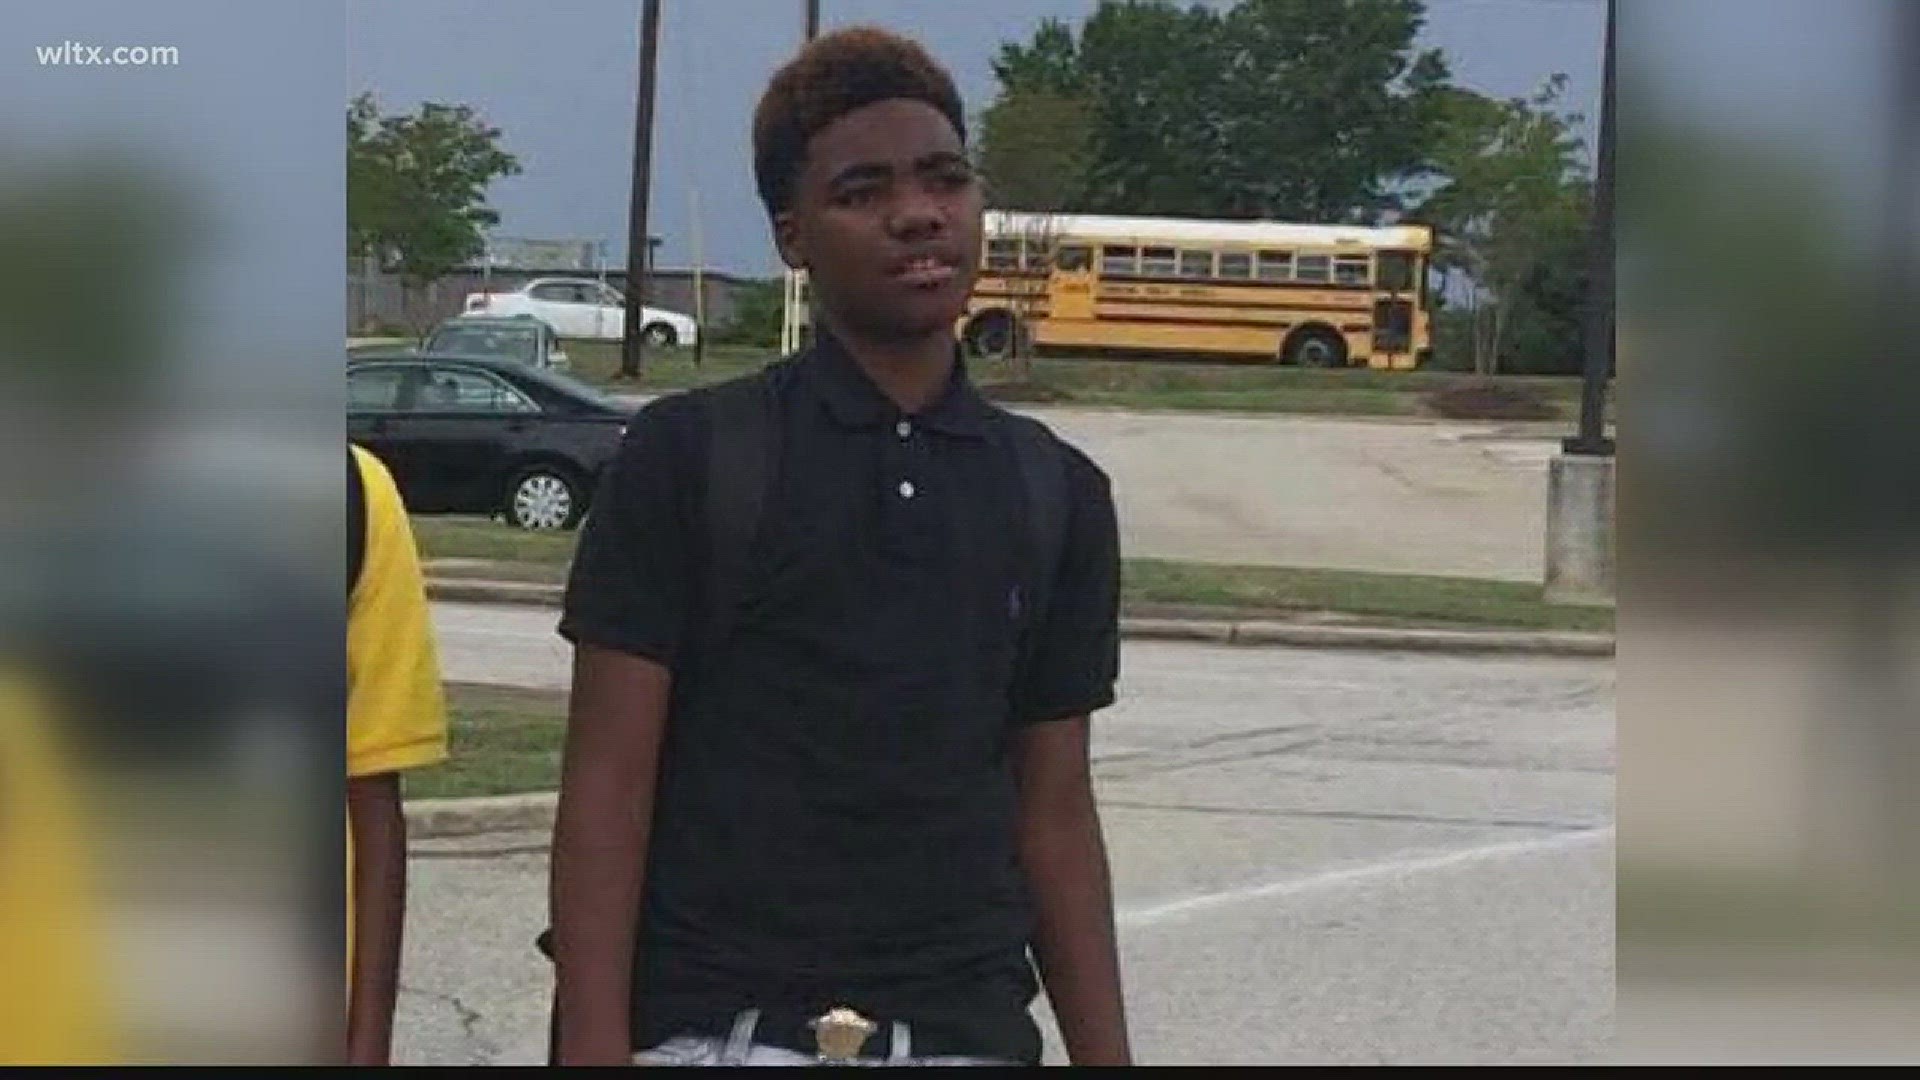 HE'S 14 YEAR OLD.....TIQUAN TAYLOR OF IRMO.	HE DIED AFTER BEING SHOT IN THE UPPER BODY YESTERDAY.DEPUTIES ARE STILL INVESTIGATING WHAT LEAD UP TO THE SHOOTING.	TONGHT WE'RE LEARNING MORE ABOUT TAYLOR ...  BY HEARING FROM THOSE WHO KNEW HIM BEST ... HIS